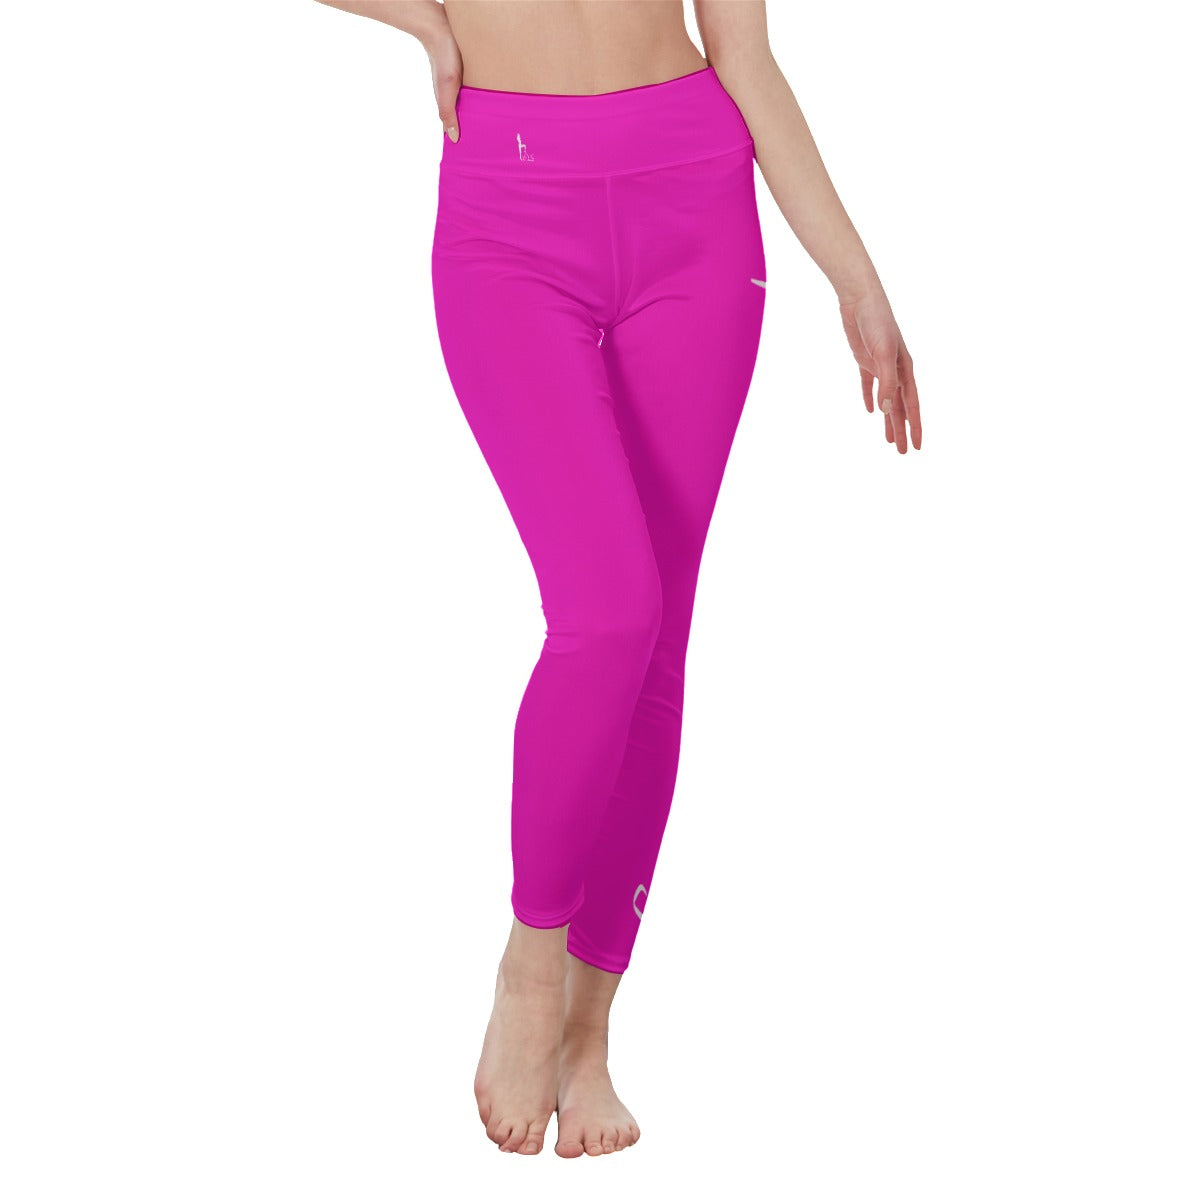 👖 Oficialmente Sexy Colors Collection Shocking Pink With White Logo Women's High Waist Leggings Color #FE13C2 👖